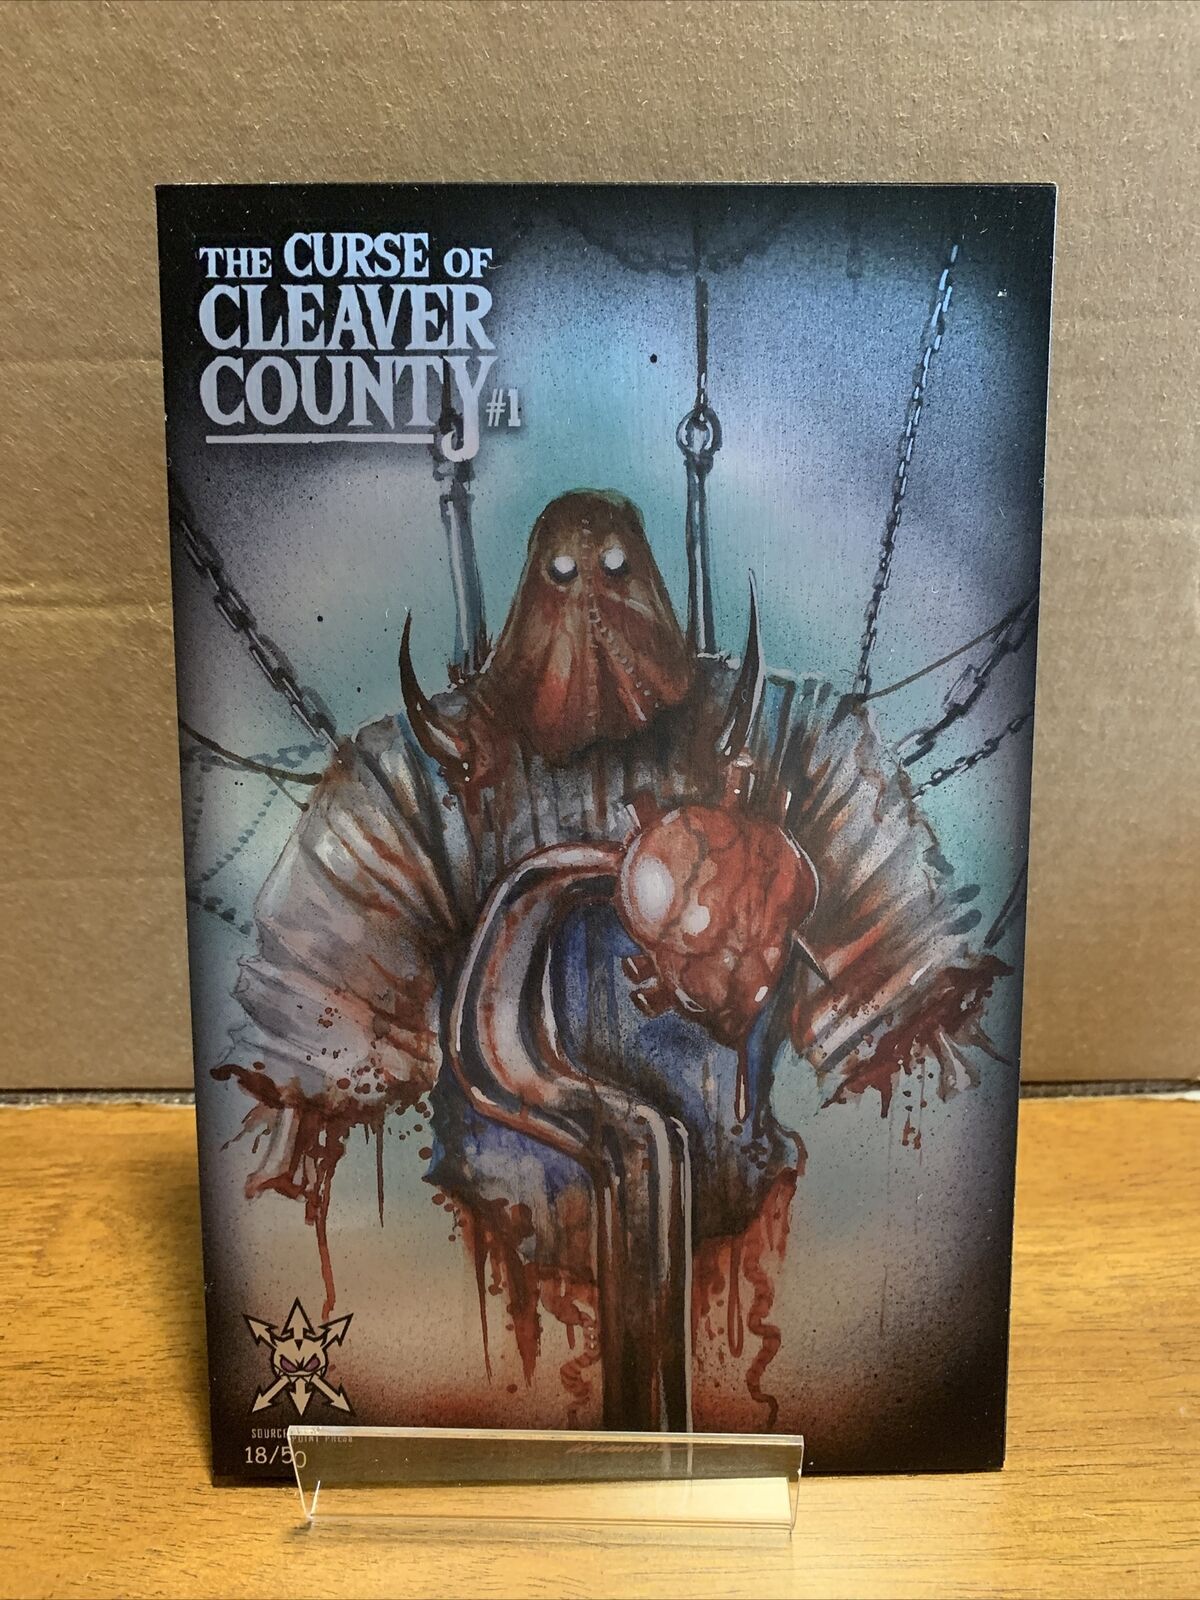 The Curse of Cleaver  County #1 Megacon Exclusive Metal by Gorkem Demir. LTD 50